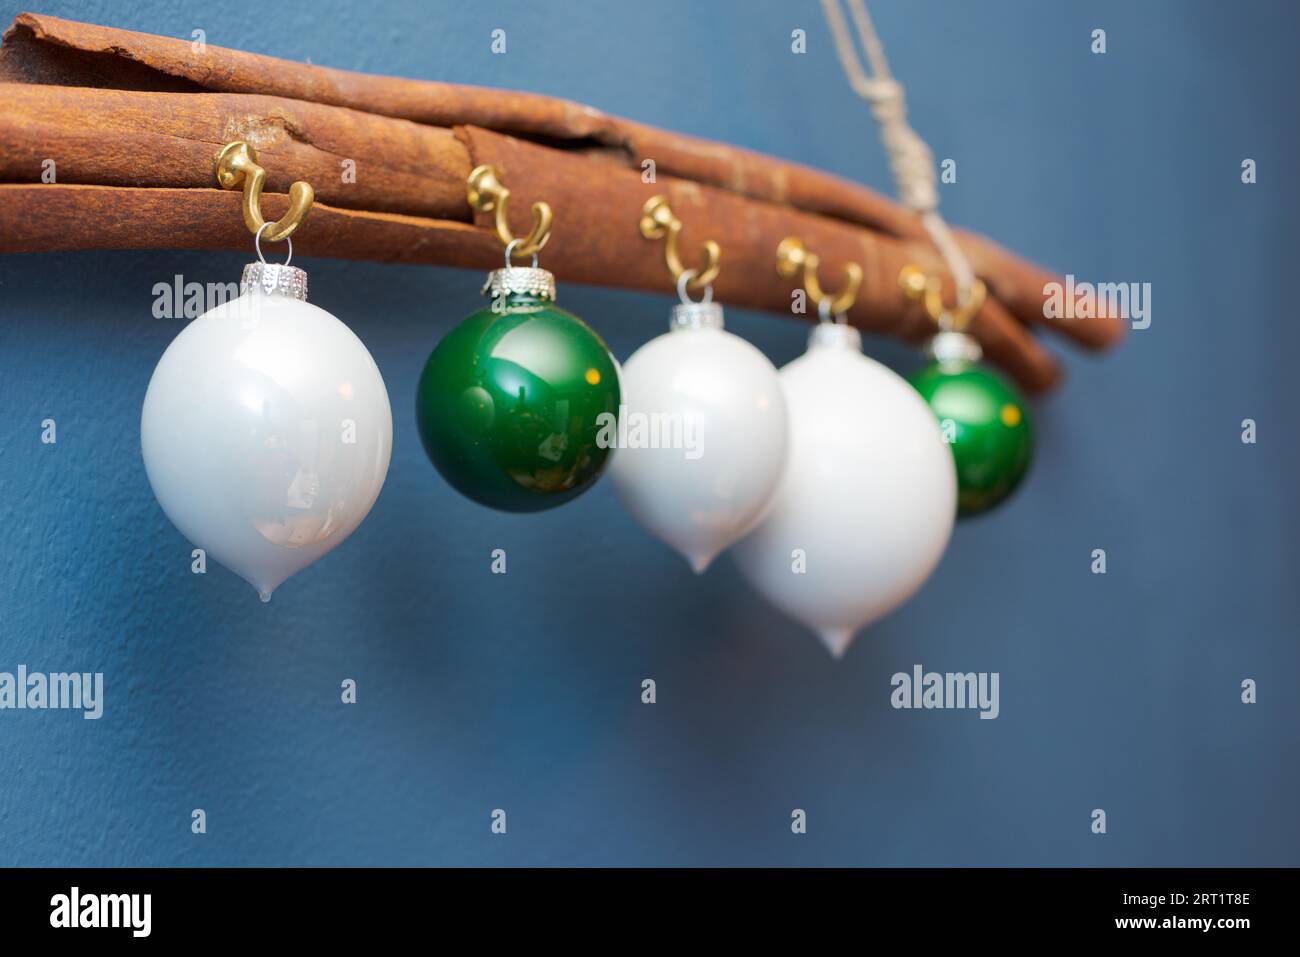 White and green christmas ornament balls hanging on hooks on big cinnamon stick on cord against blue painted wall Stock Photo